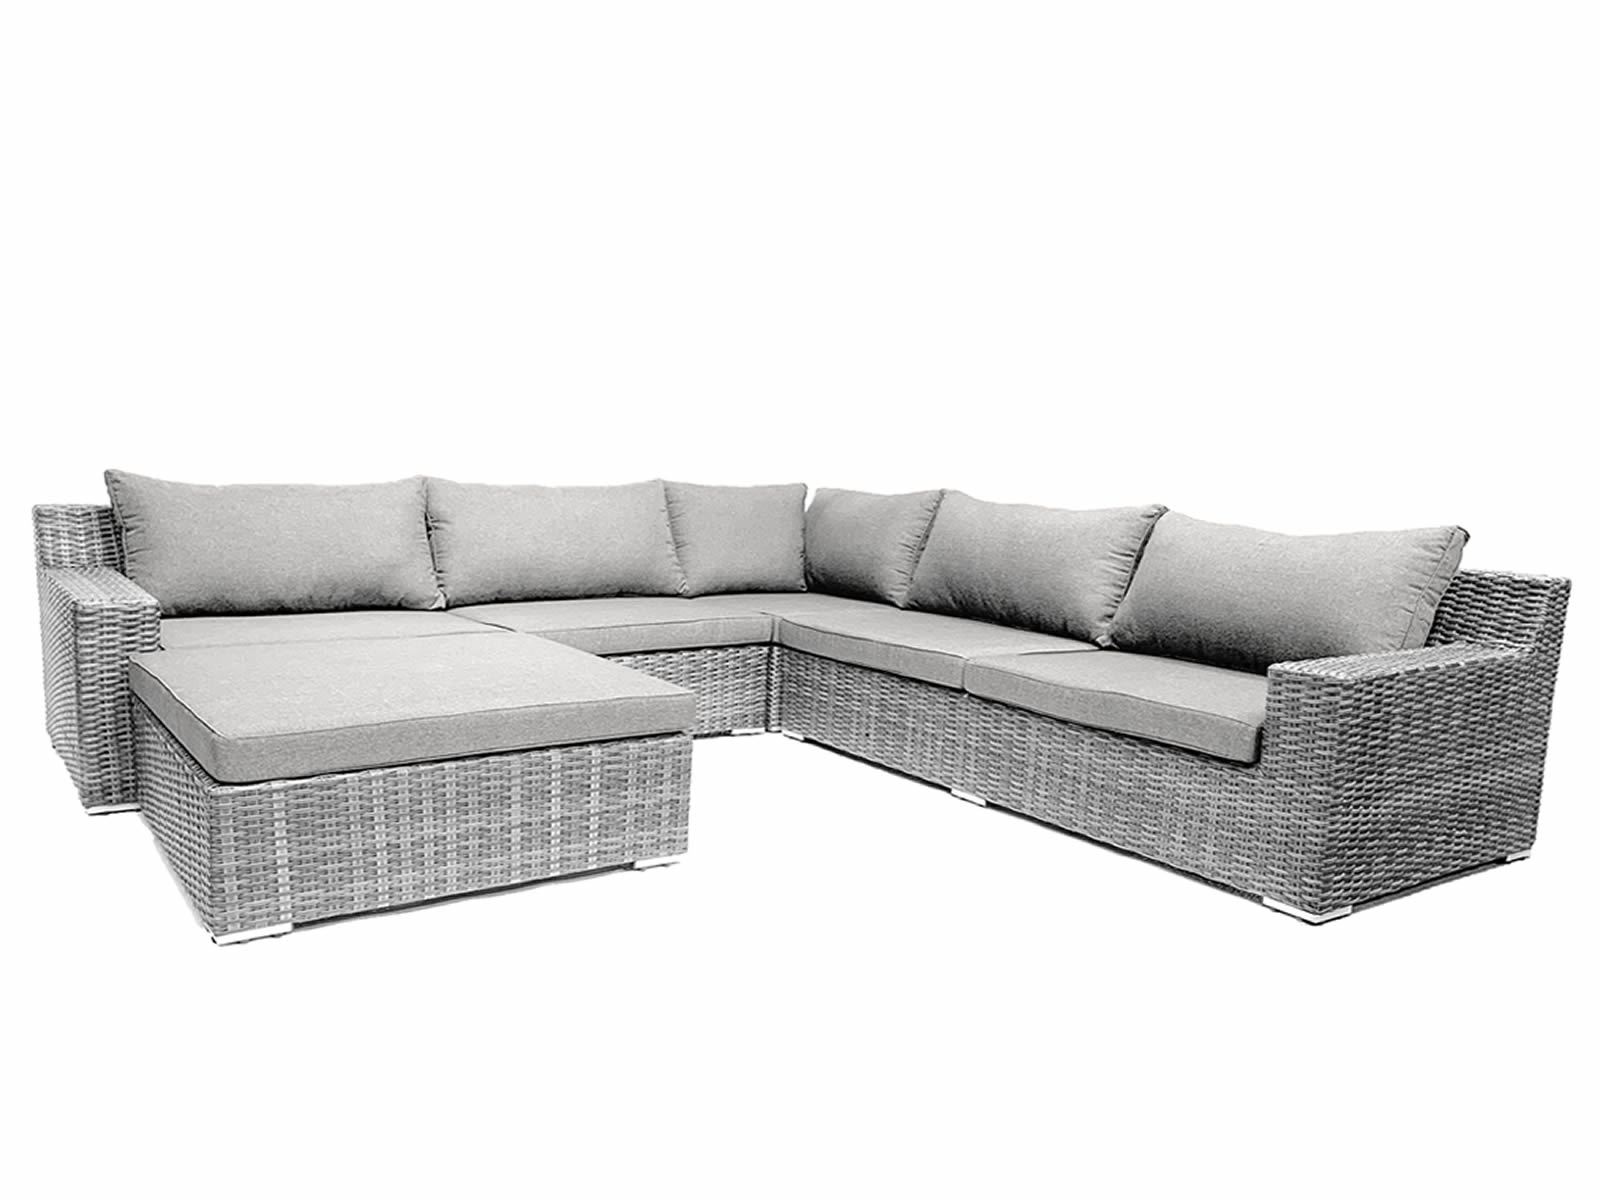 | - Garden lounge Blended 7-person beige Furniture Colorado | Gray Webshop cushions Garden with Yellow set